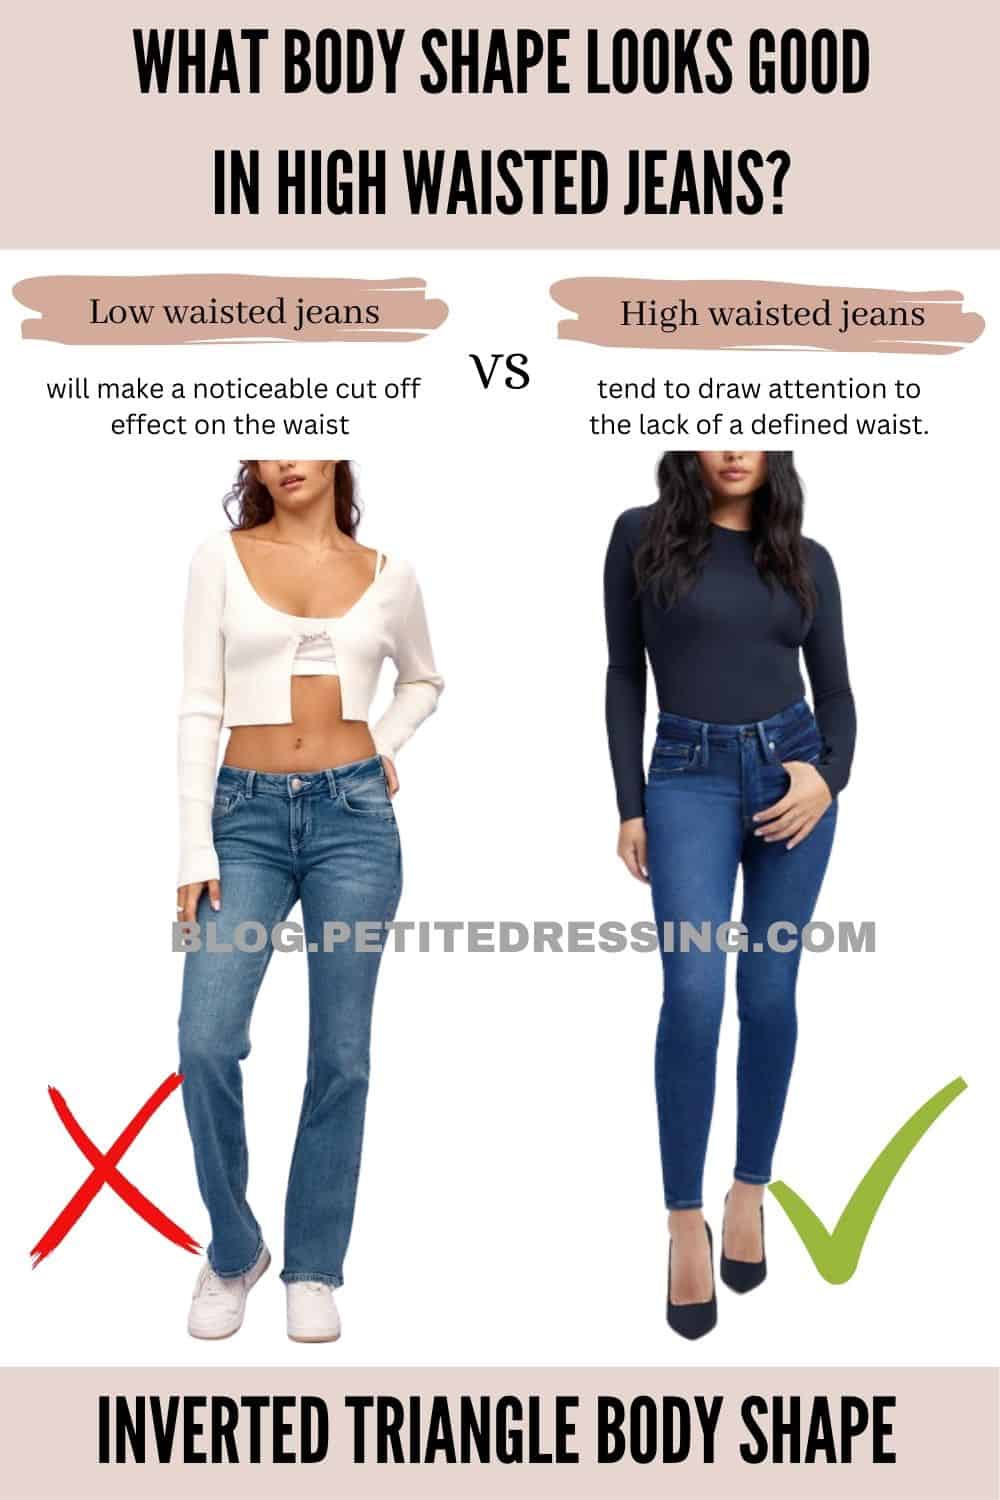 What's the difference between a low, mid and high waist pair of